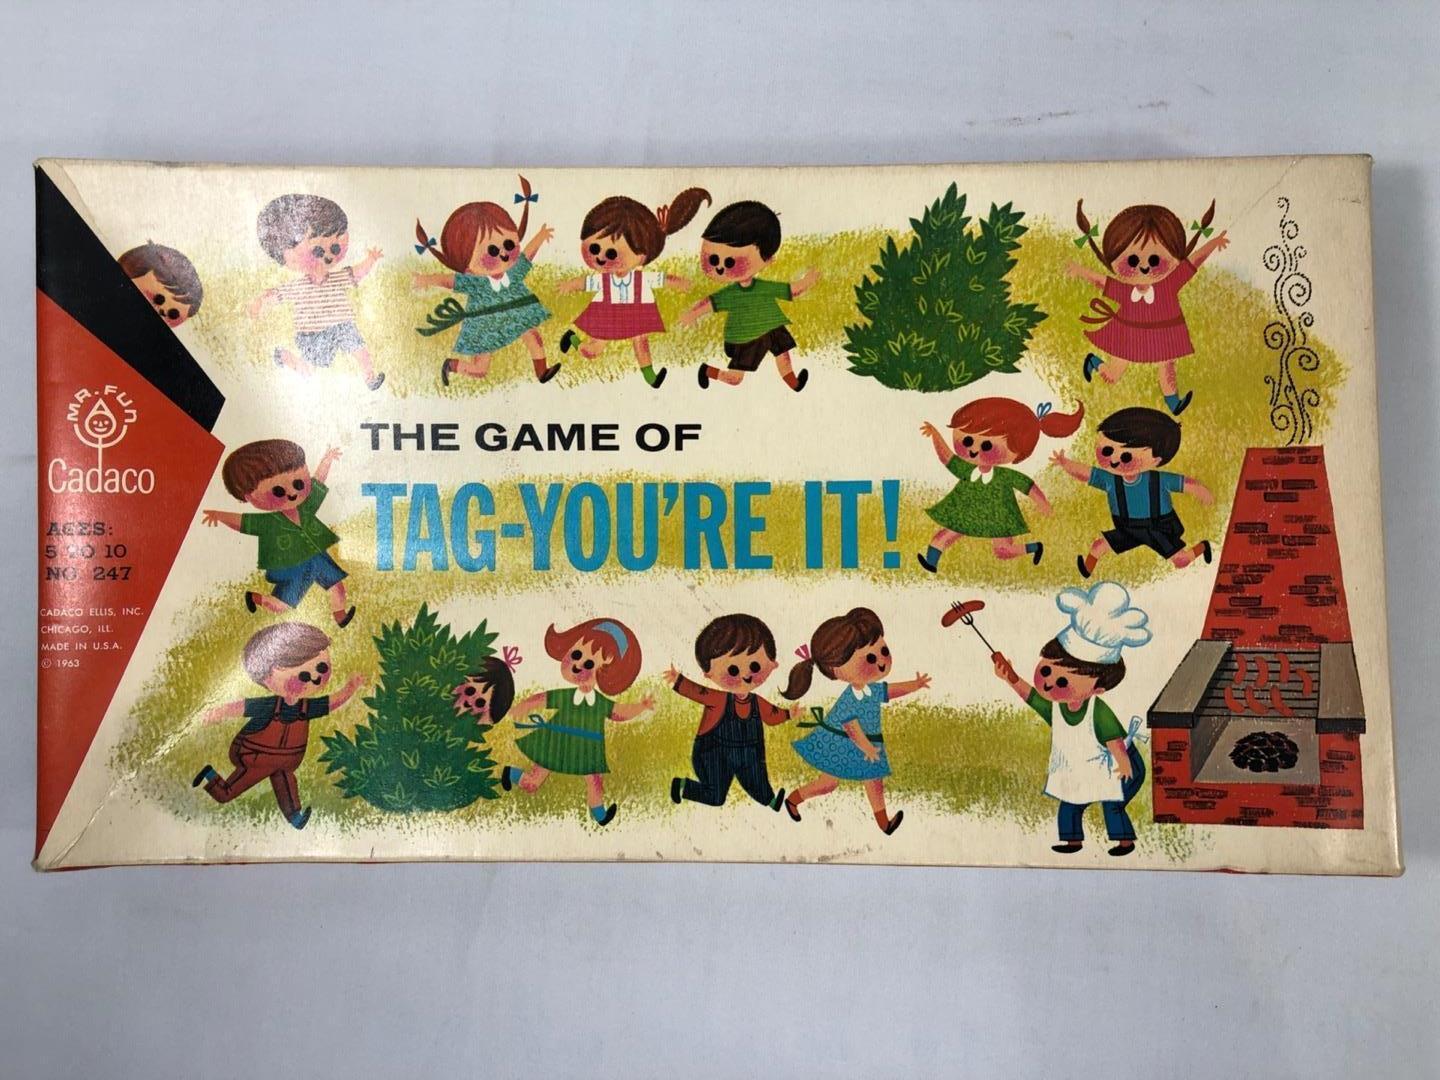 Vintage Tag You're It Board Game Cadaco 1963 Complete - $25.00